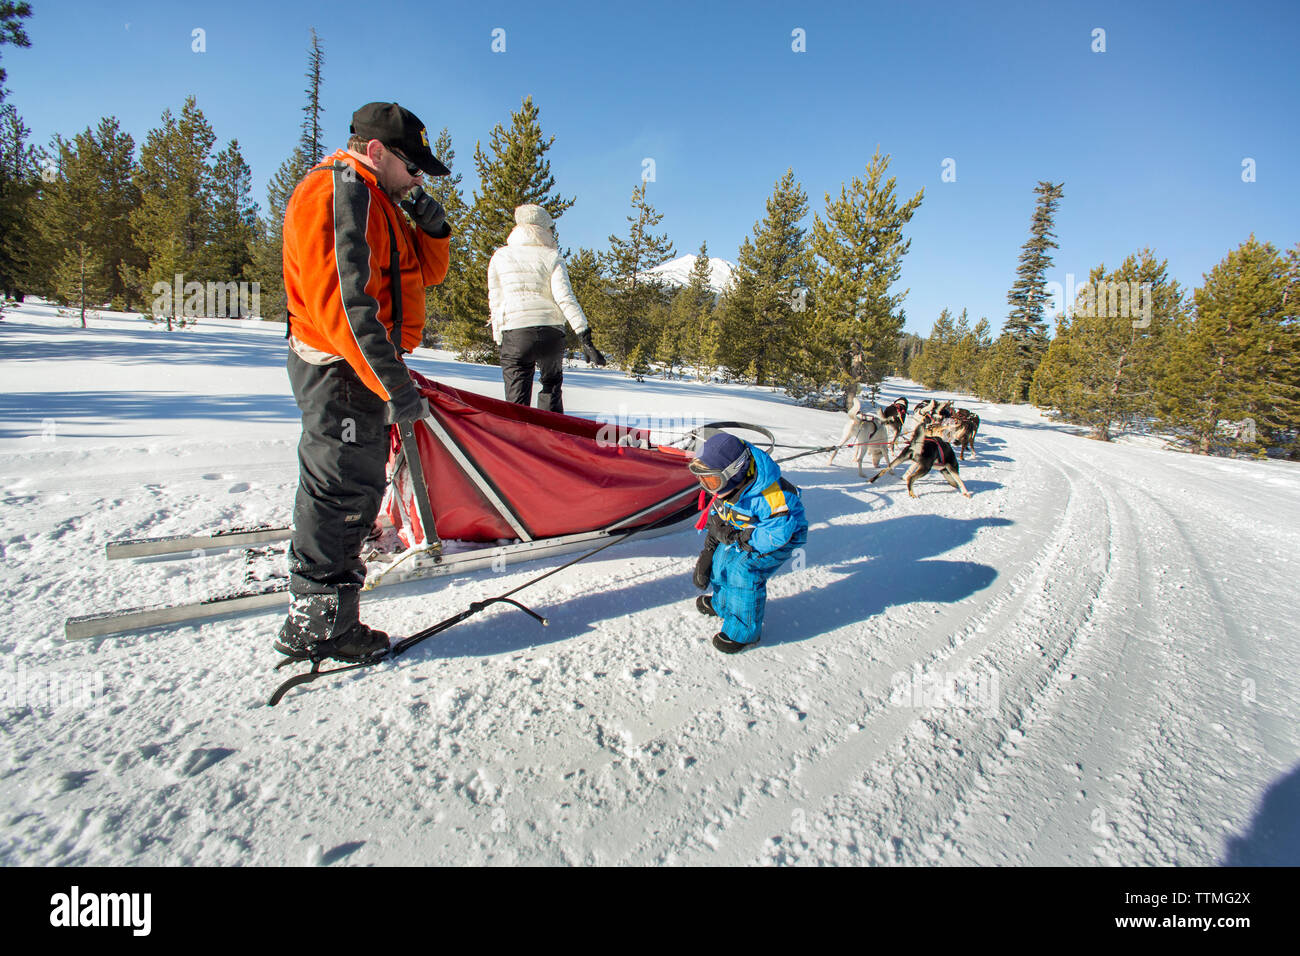 USA, Oregon, Bend, the musher showing a young boy the different parts of the dog sled Stock Photo